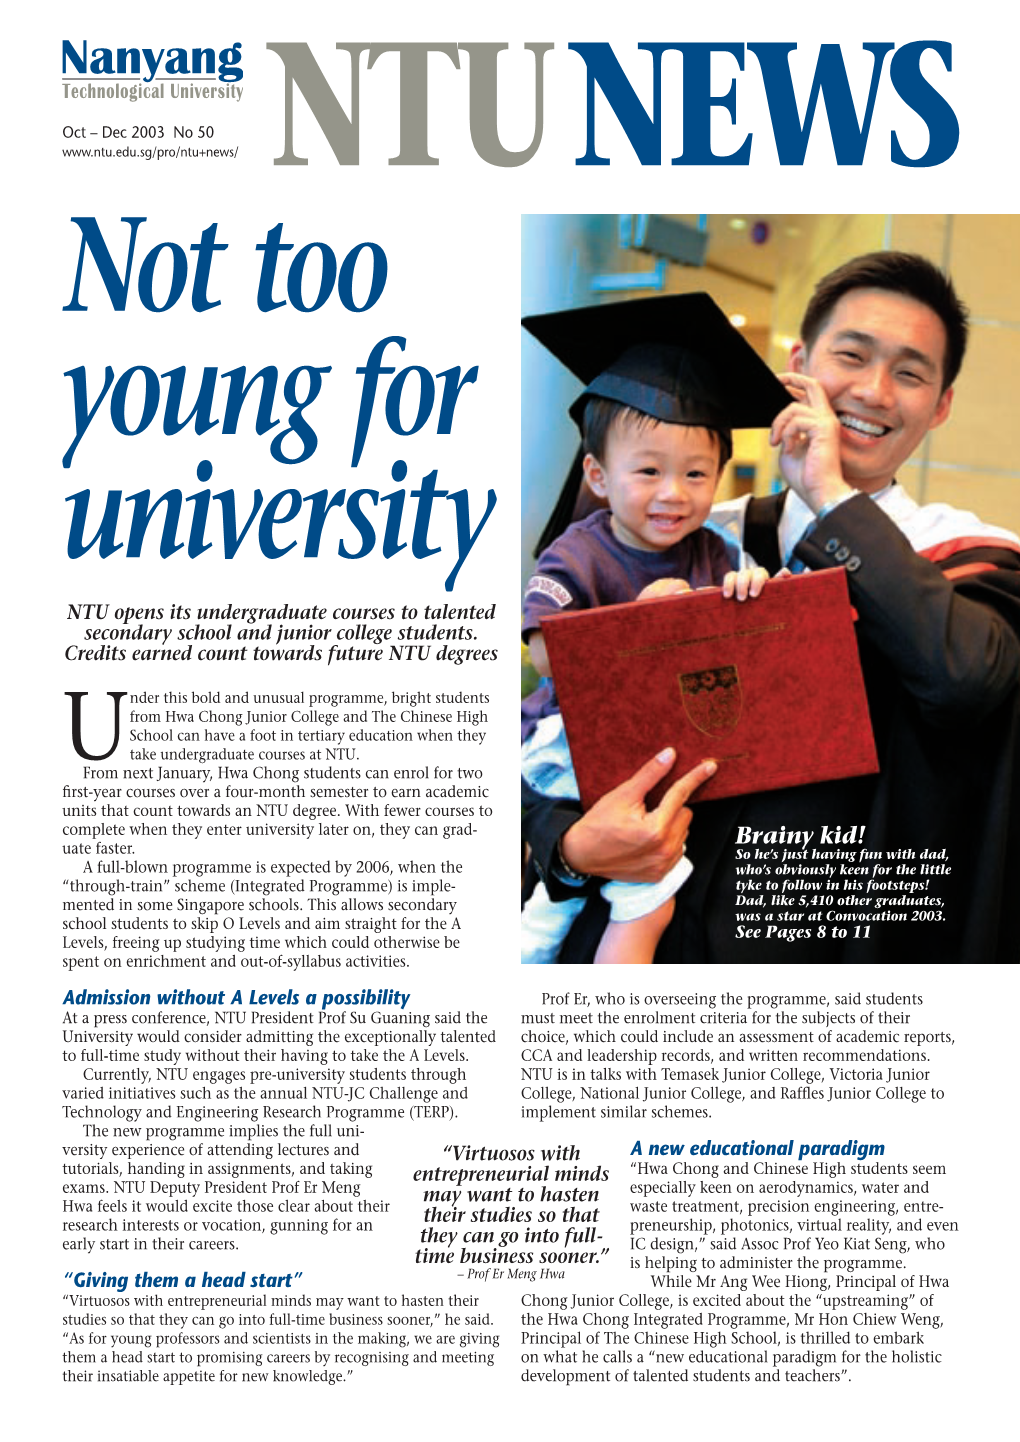 Not Too Young for University NTU Opens Its Undergraduate Courses to Talented Secondary School and Junior College Students